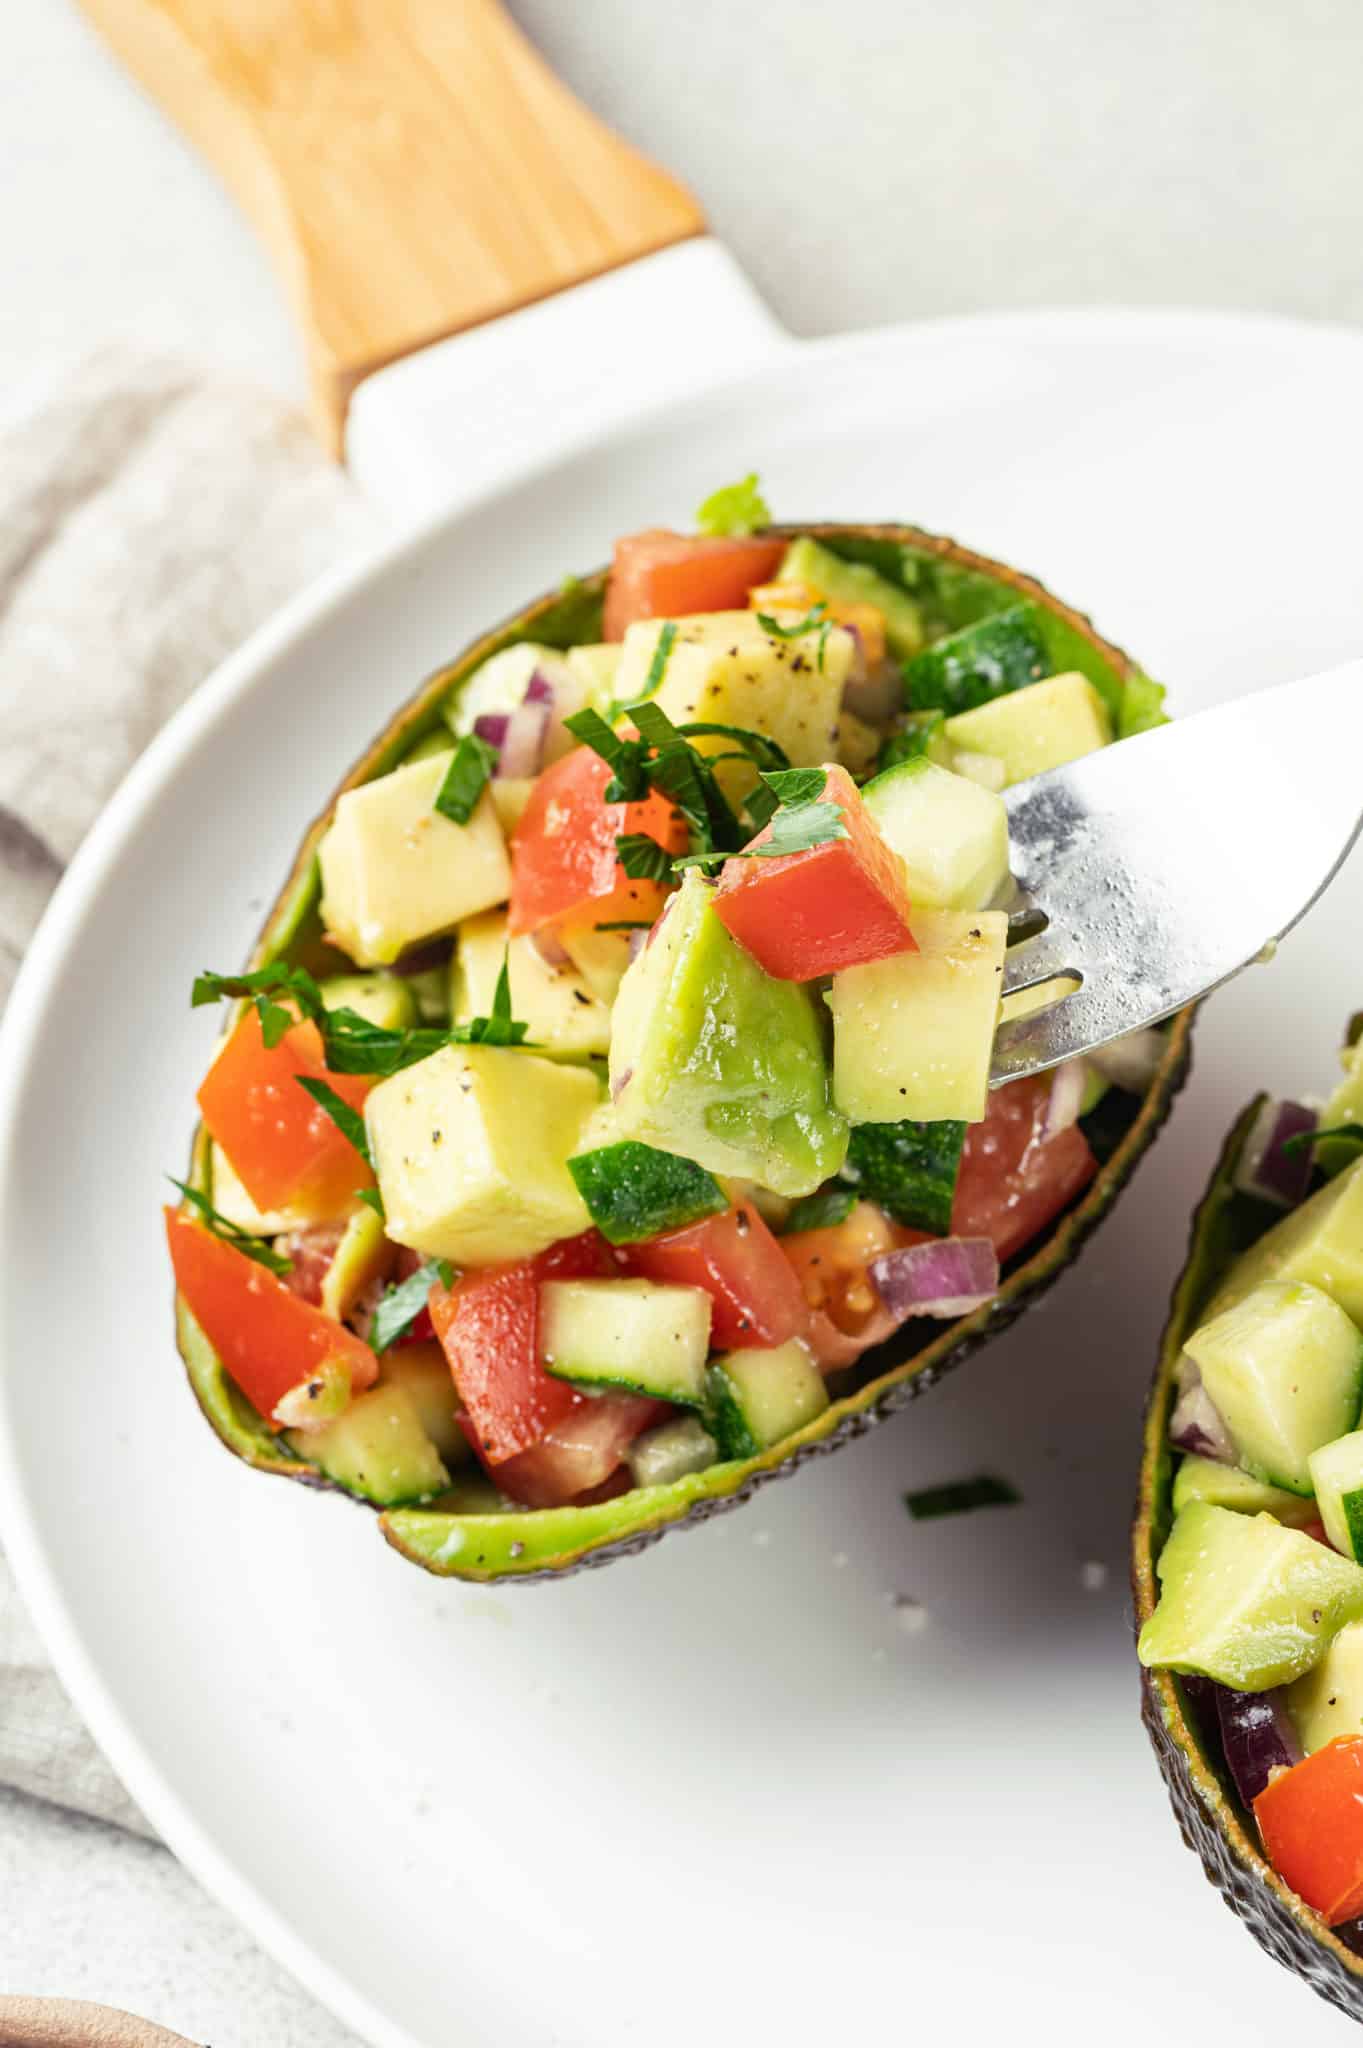 Simple Avocado Salad Recipe with Tomatoes